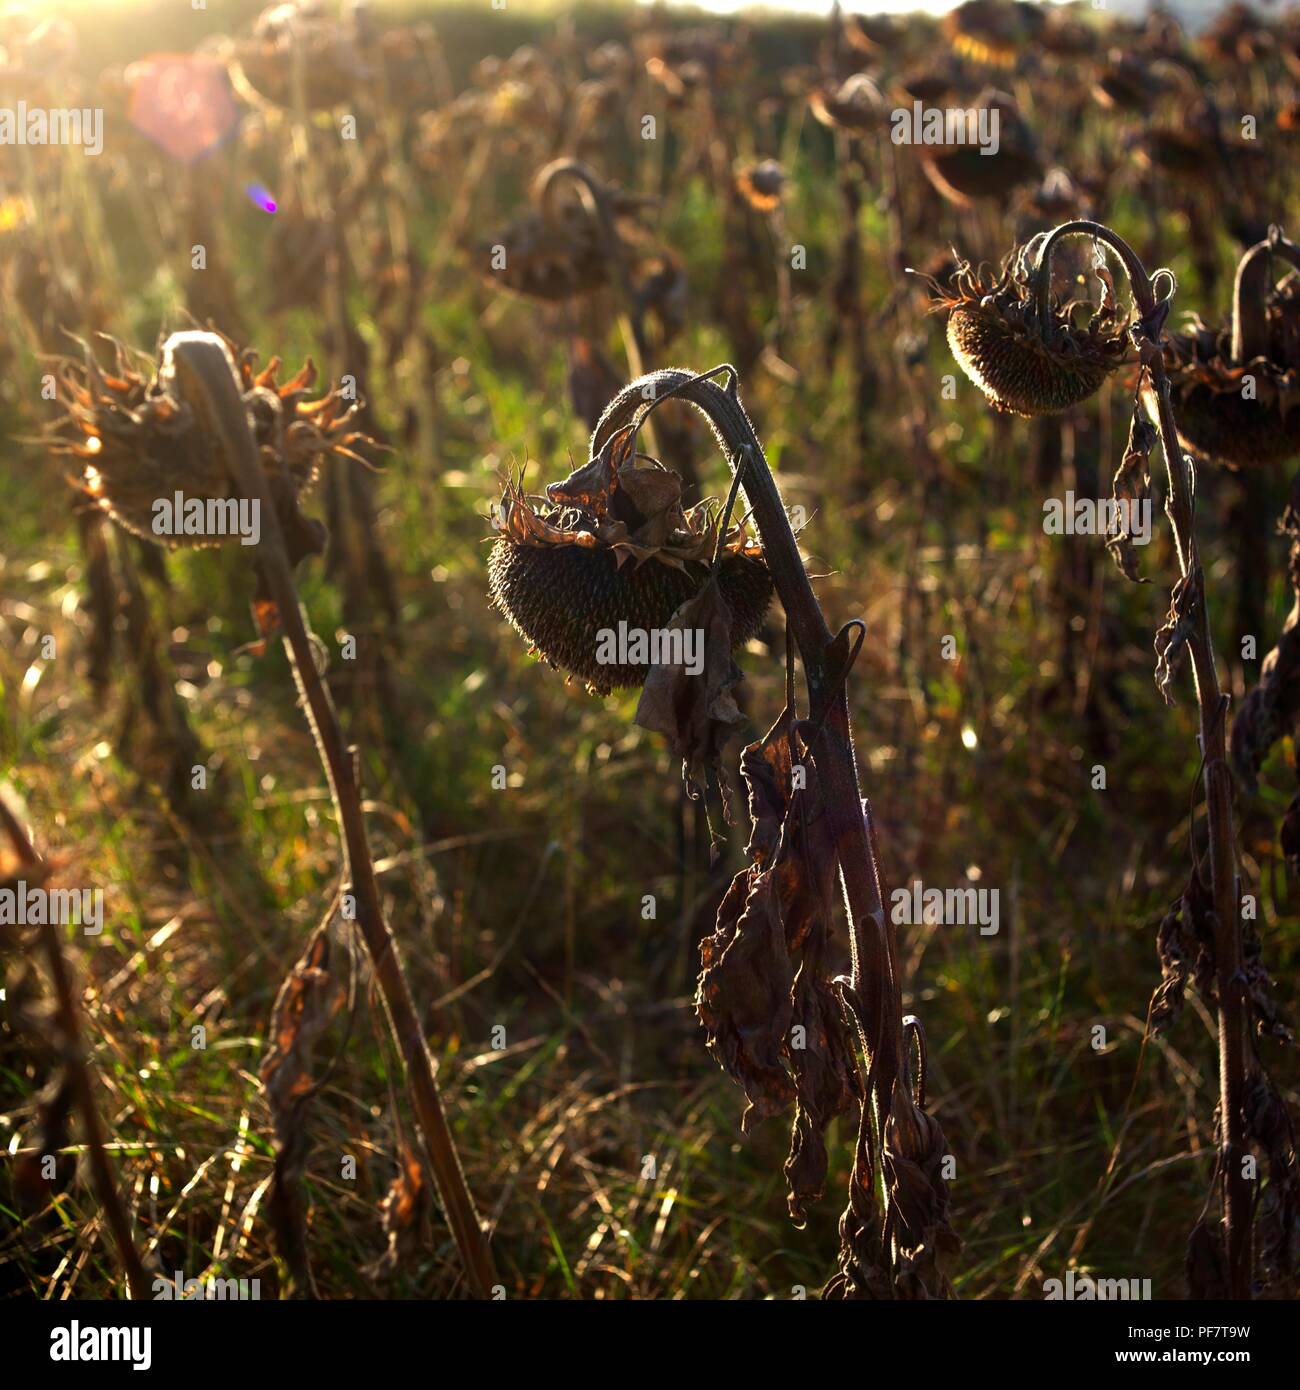 Closeup shot of wilting sunflowers in the filed under the sunlight Stock Photo